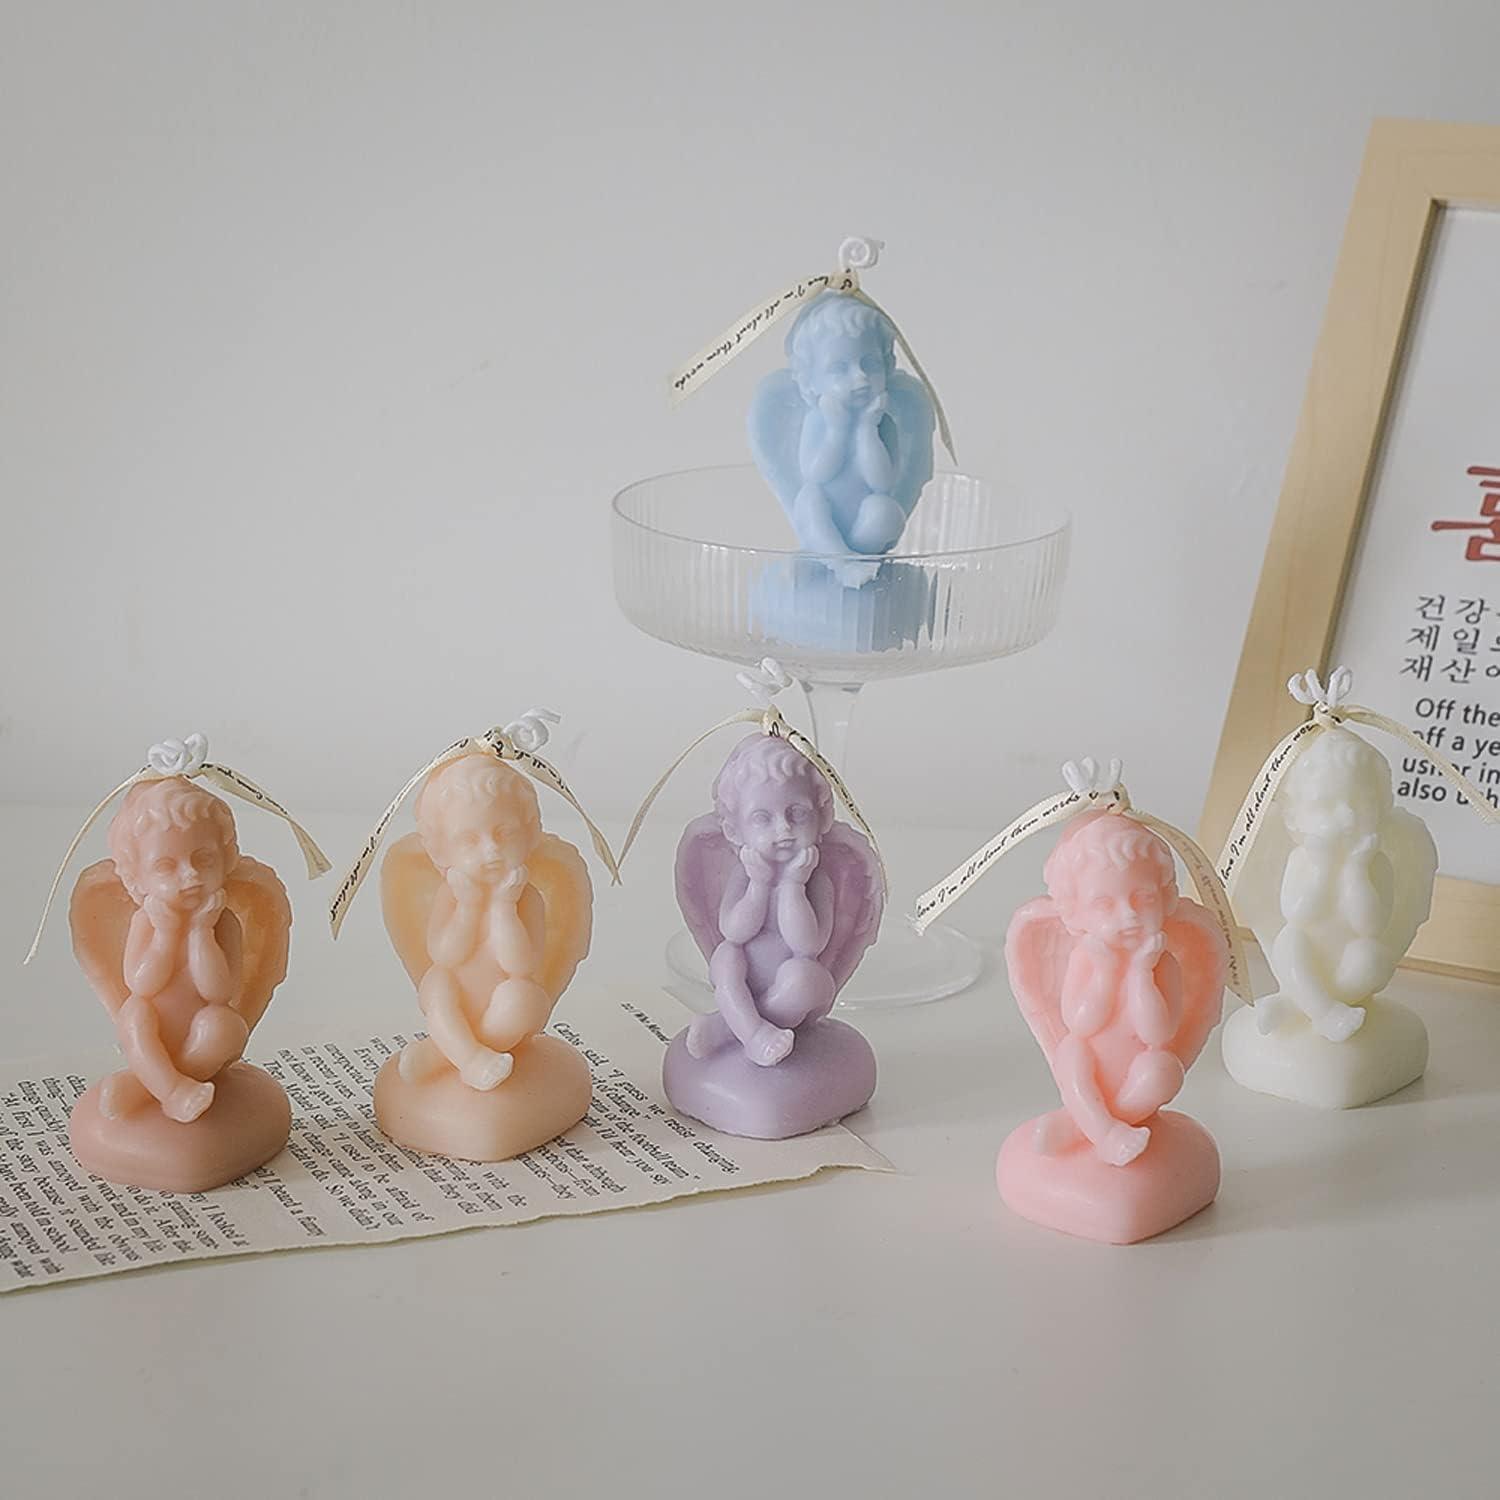 Set of 8 Cute Angel Shaped Scented Candles,50G Aroma Soy Wax Decorative Candles, Handmade Aesthetic Candles for Table Decorations,Photo Prop Birthday Gifts - Decotree.co Online Shop